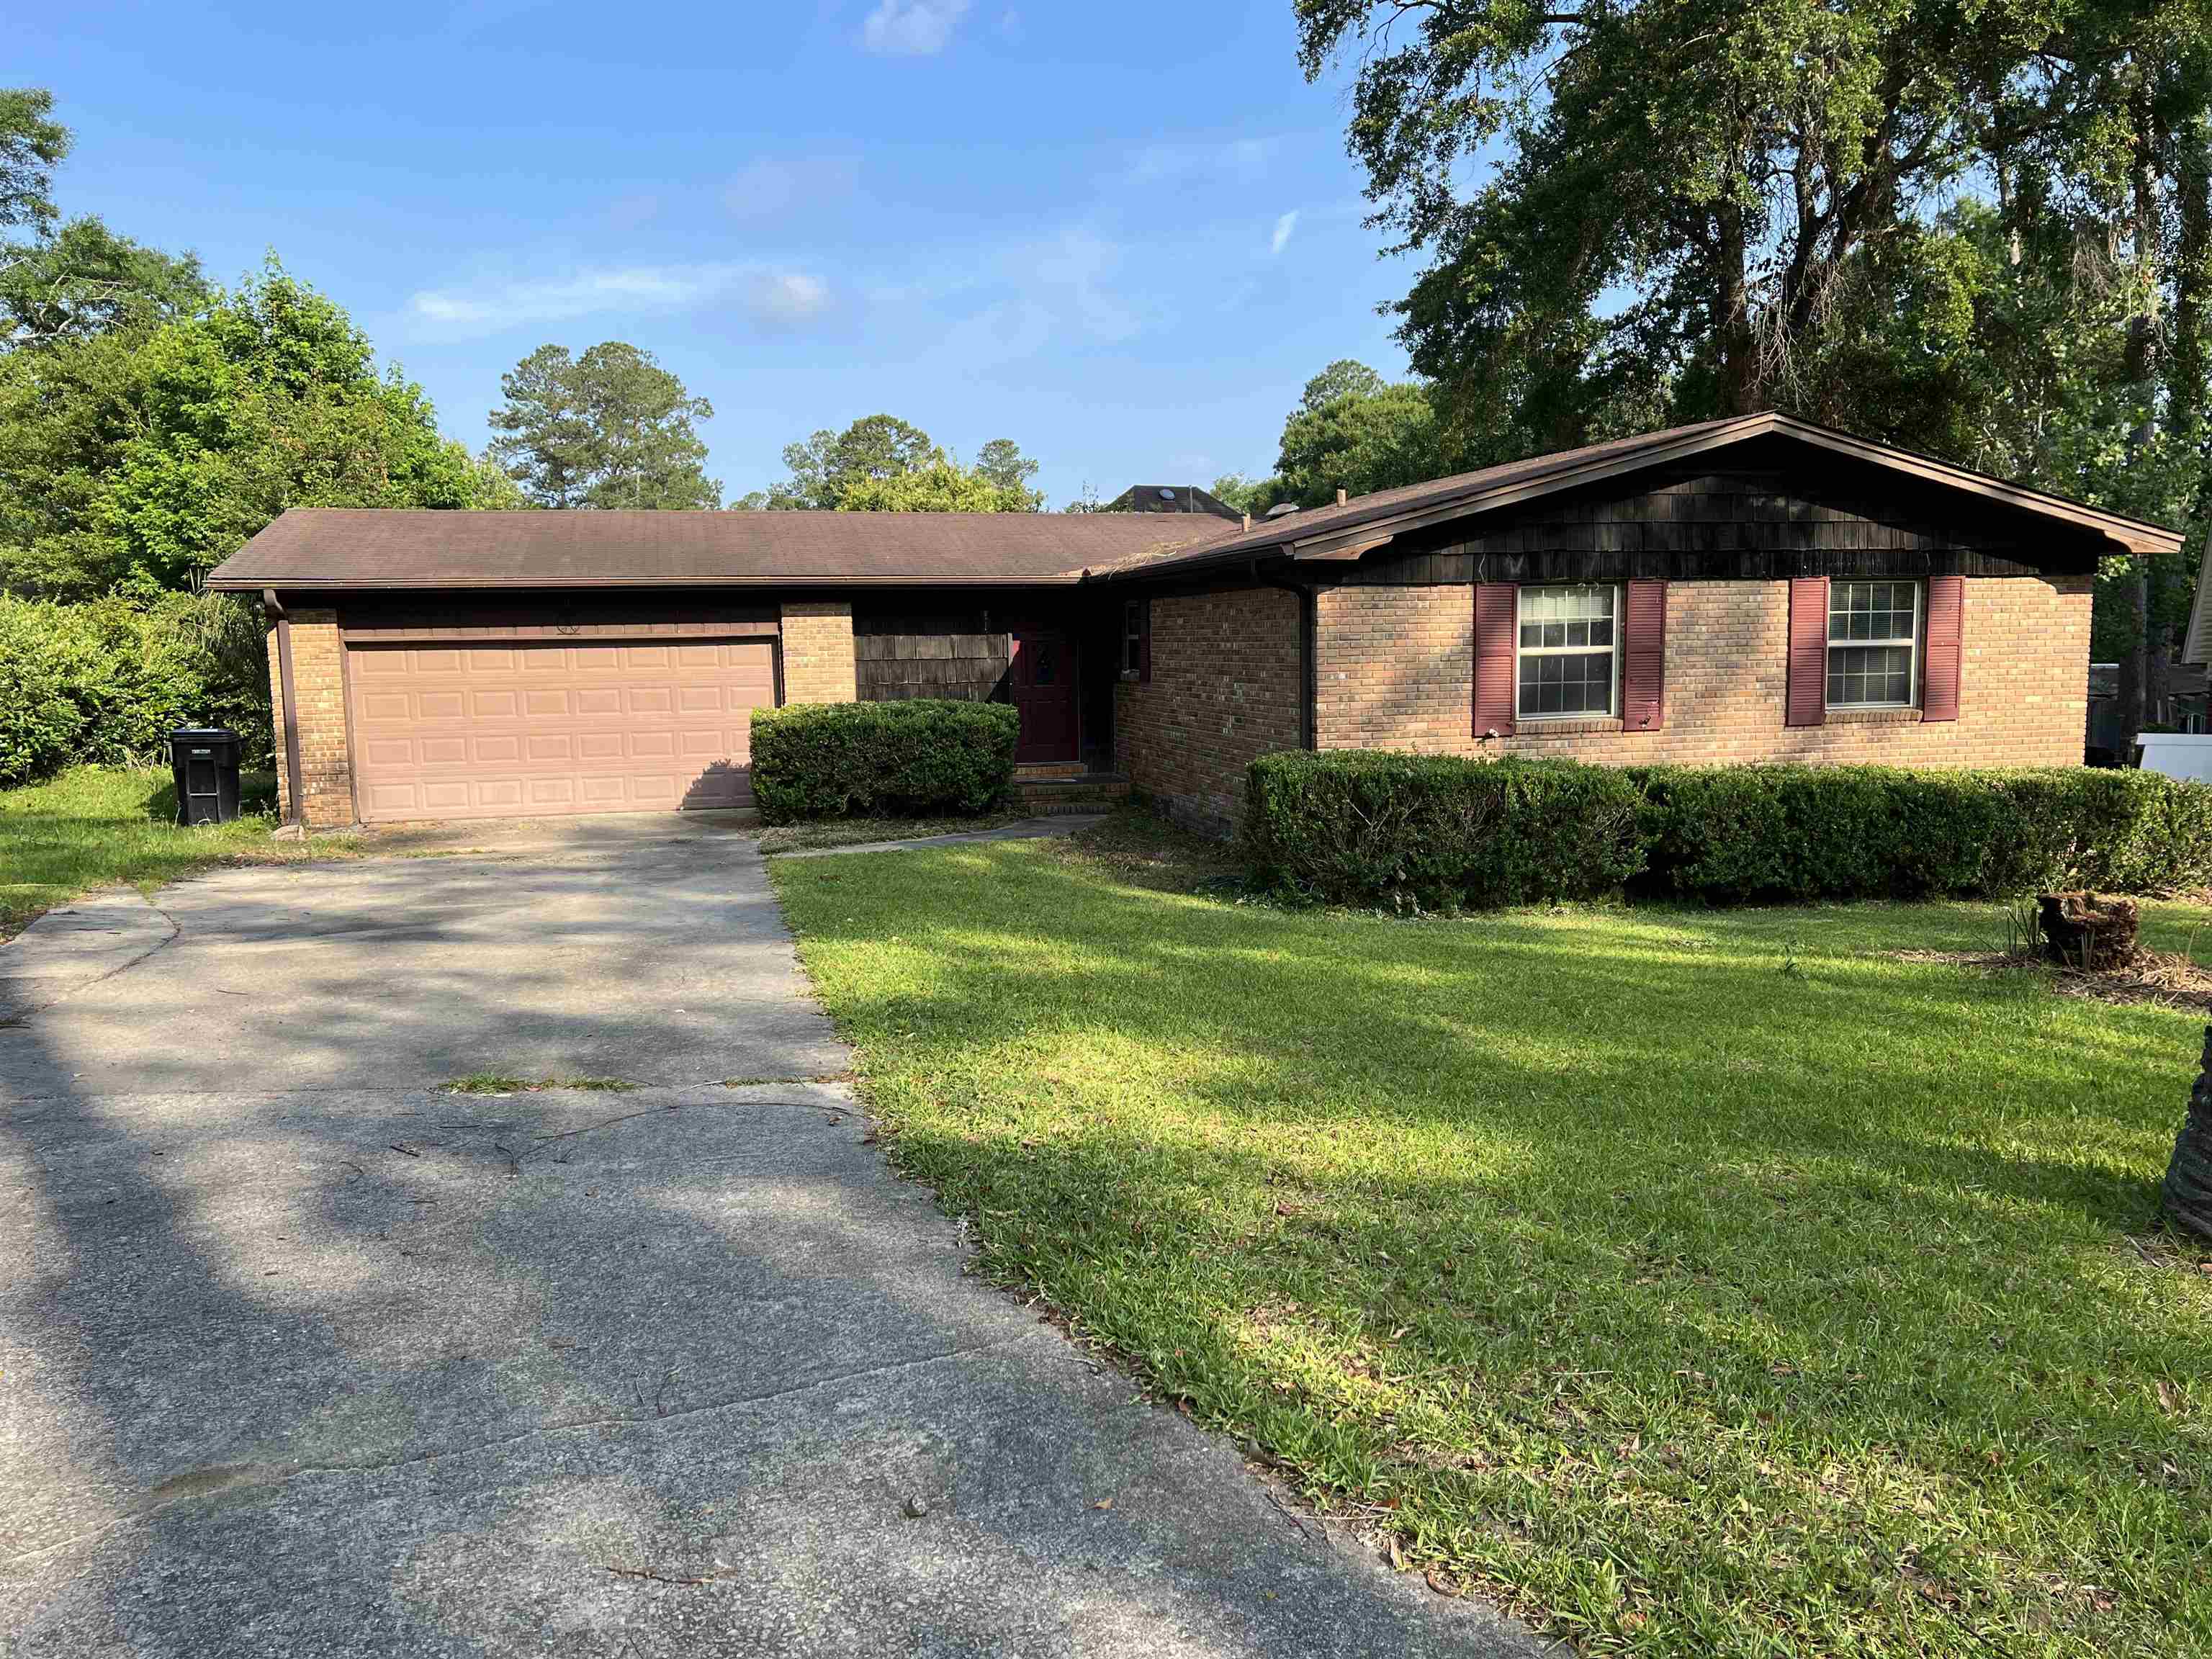 UPDATE: *Sellers to install new roof and new gas water heater* Location location location! This 3 bedroom, 2 bath home in Woodgate is coveniently located just minutes from downtown, FSU, both hospitals, shopping, and I-10. Woodgate began in 1970 and is home to longtime residents, familes and professionals. Zoned for Kate Sullivan, Cobb and Leon. This home features hardwood floors in the common area, a gas fireplace and water heater, large backyard deck and an enclosed sunroom. Buyer to confirm all measurements. Price includes washer, dryer and 2nd refrigerator located in garage. Seller will install new garage door opener prior to closing.